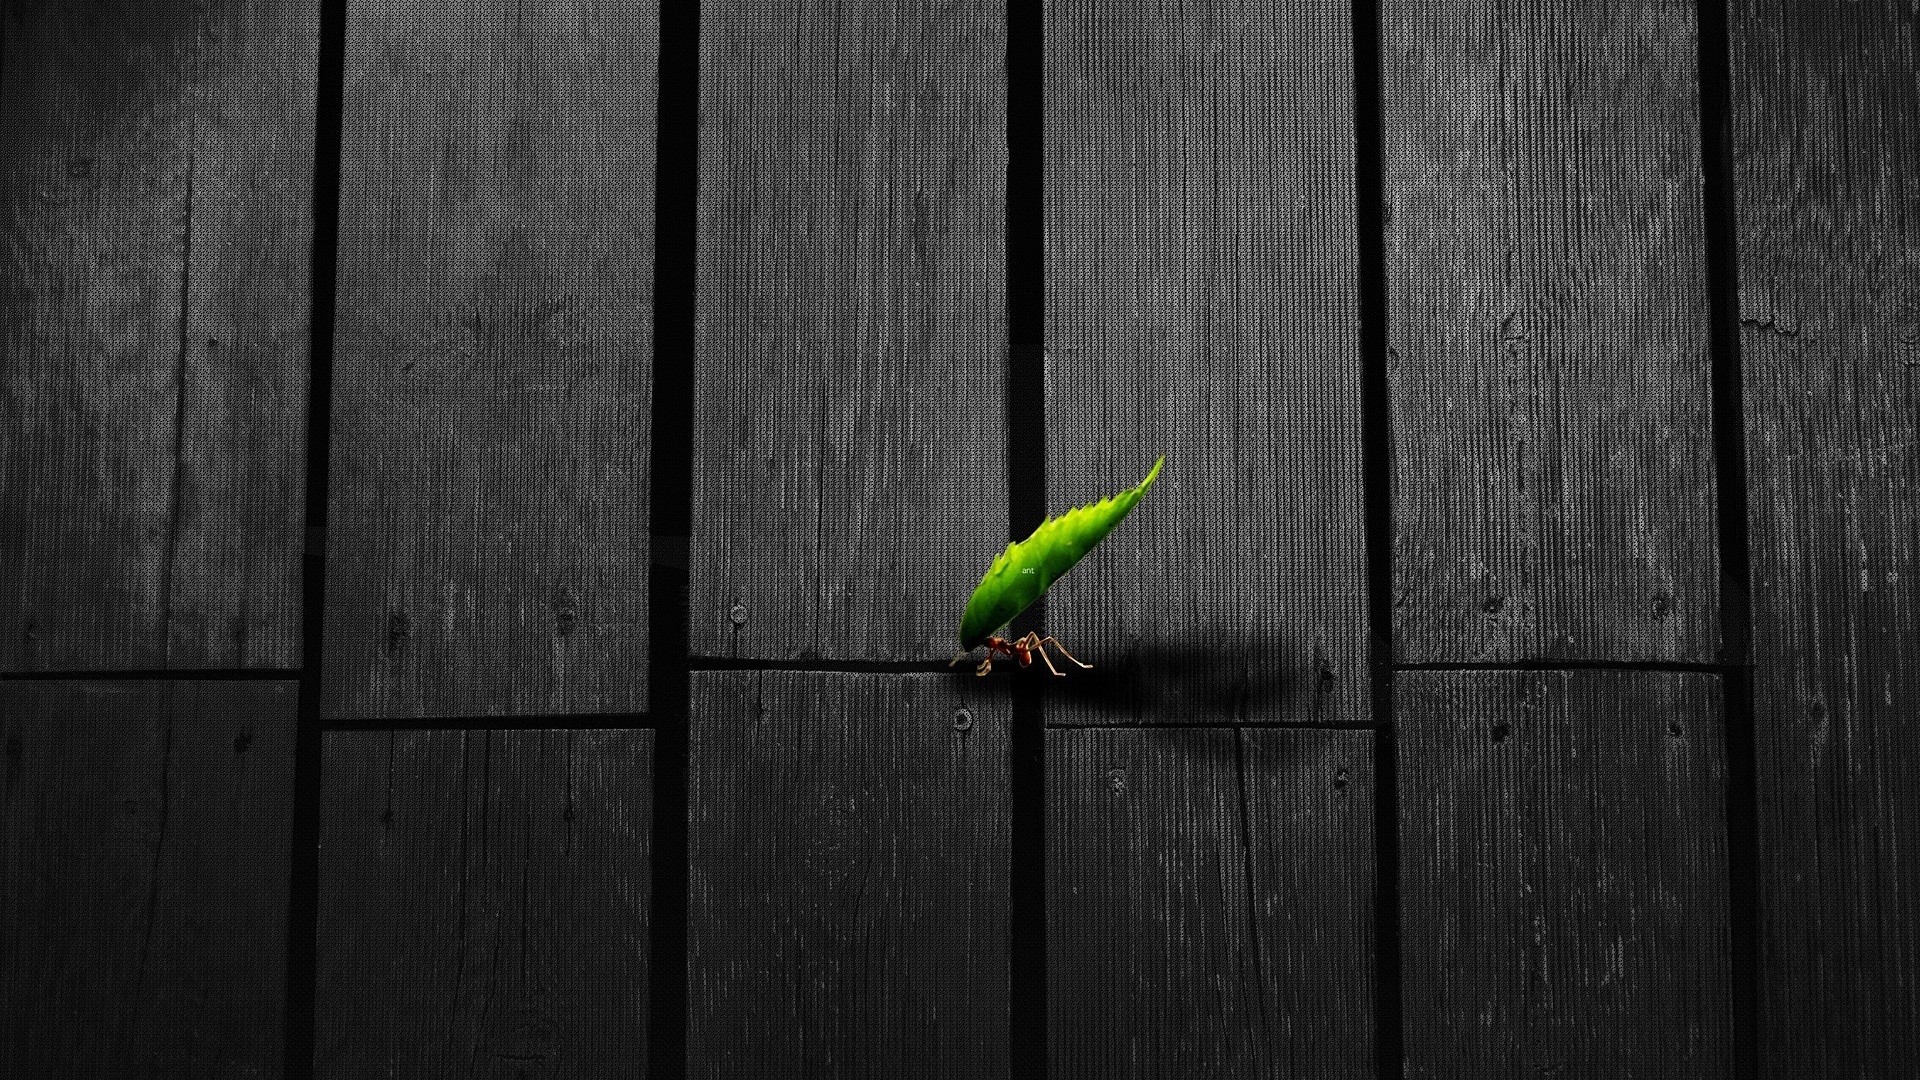 Insect Artwork Texture Leaves Animals Ants 1920x1080